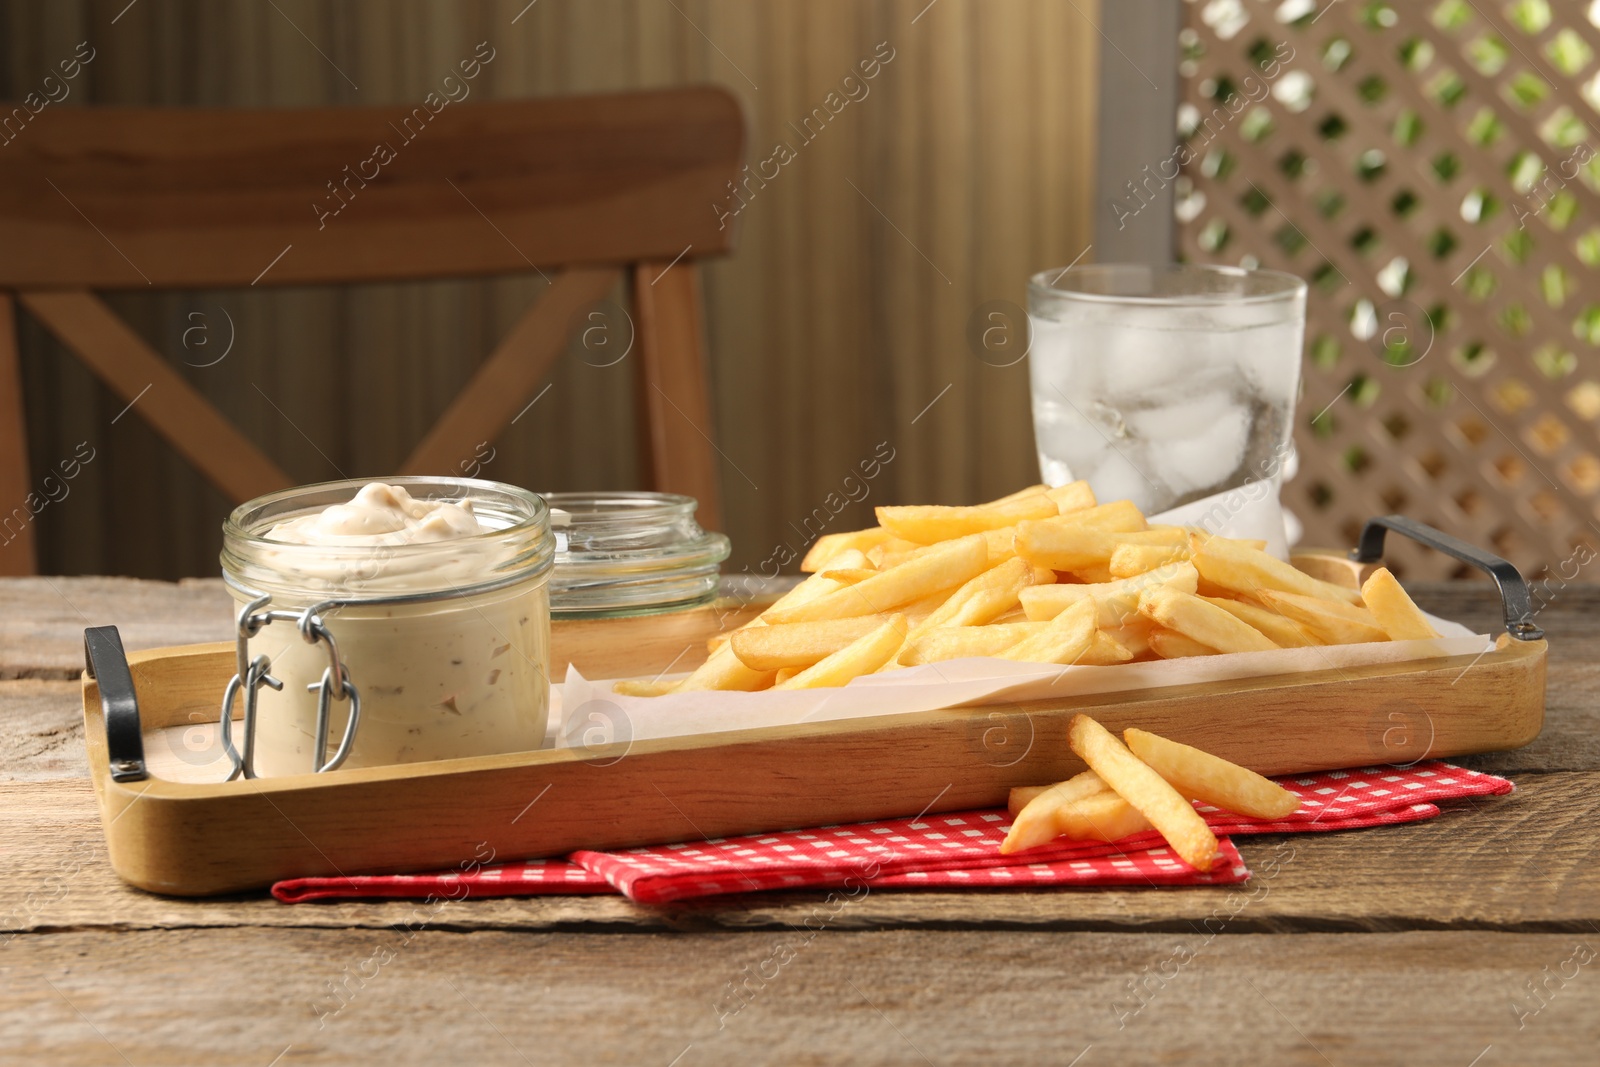 Photo of Delicious french fries served with sauce and glass of water on wooden table